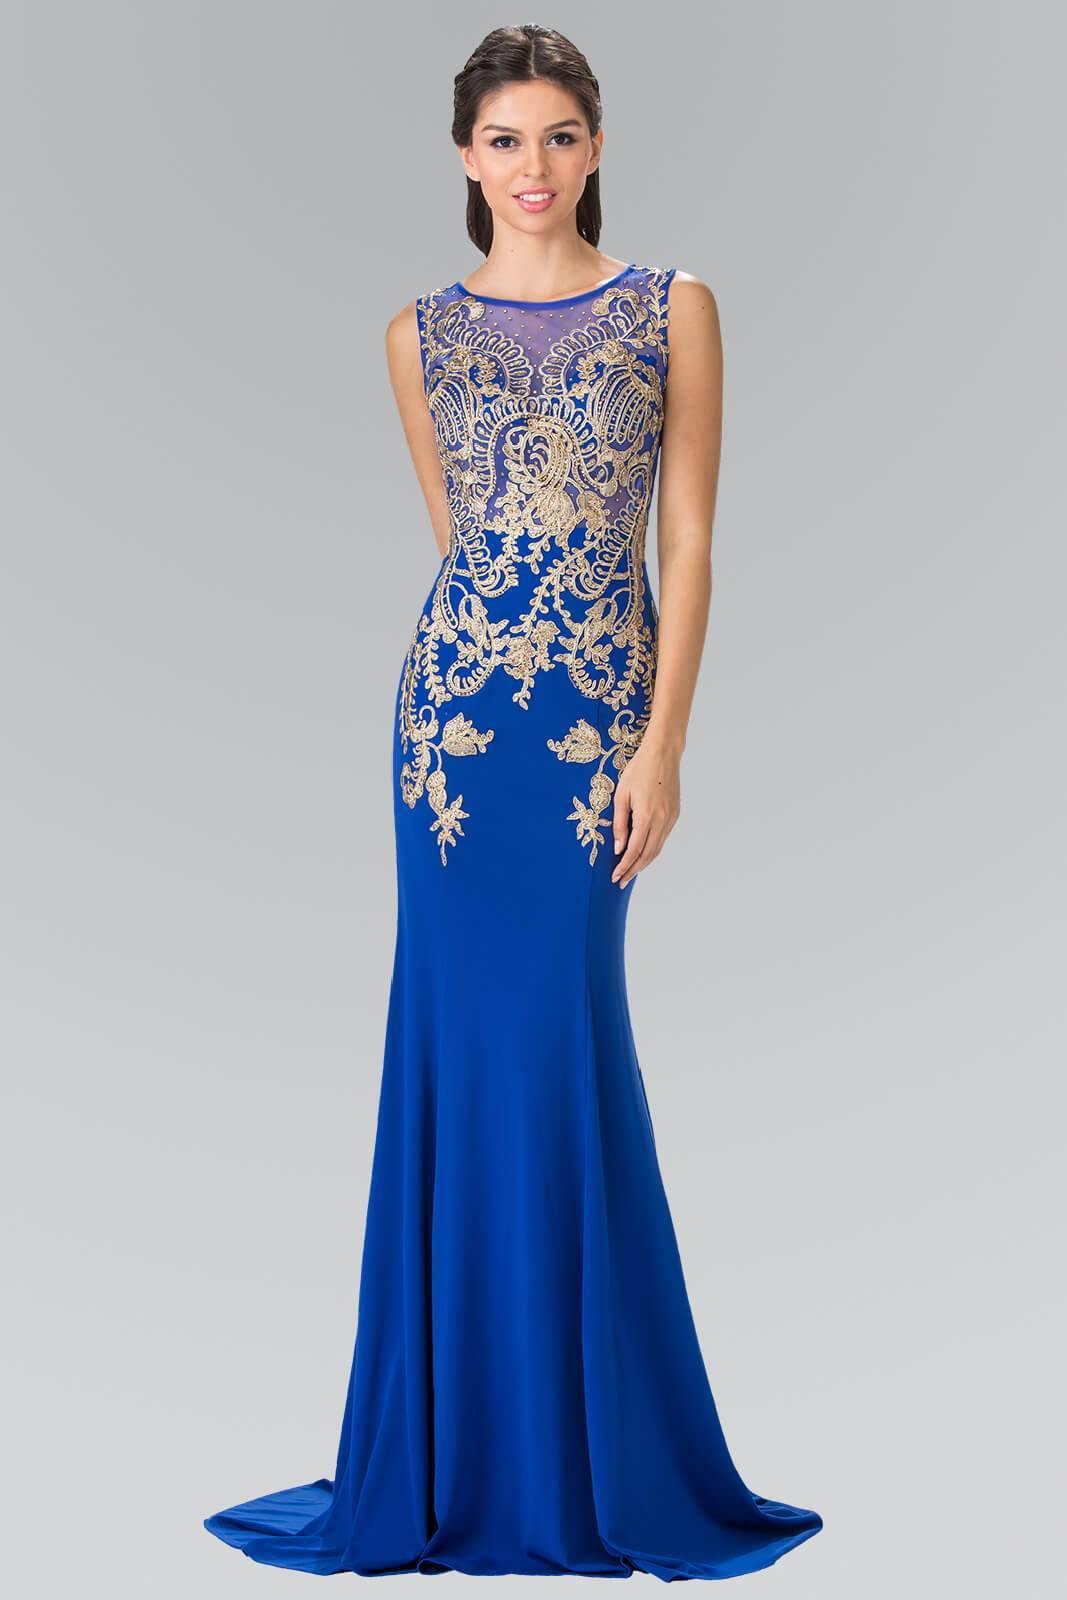 Sleeveless Long Fitted Prom Dress Sale - The Dress Outlet